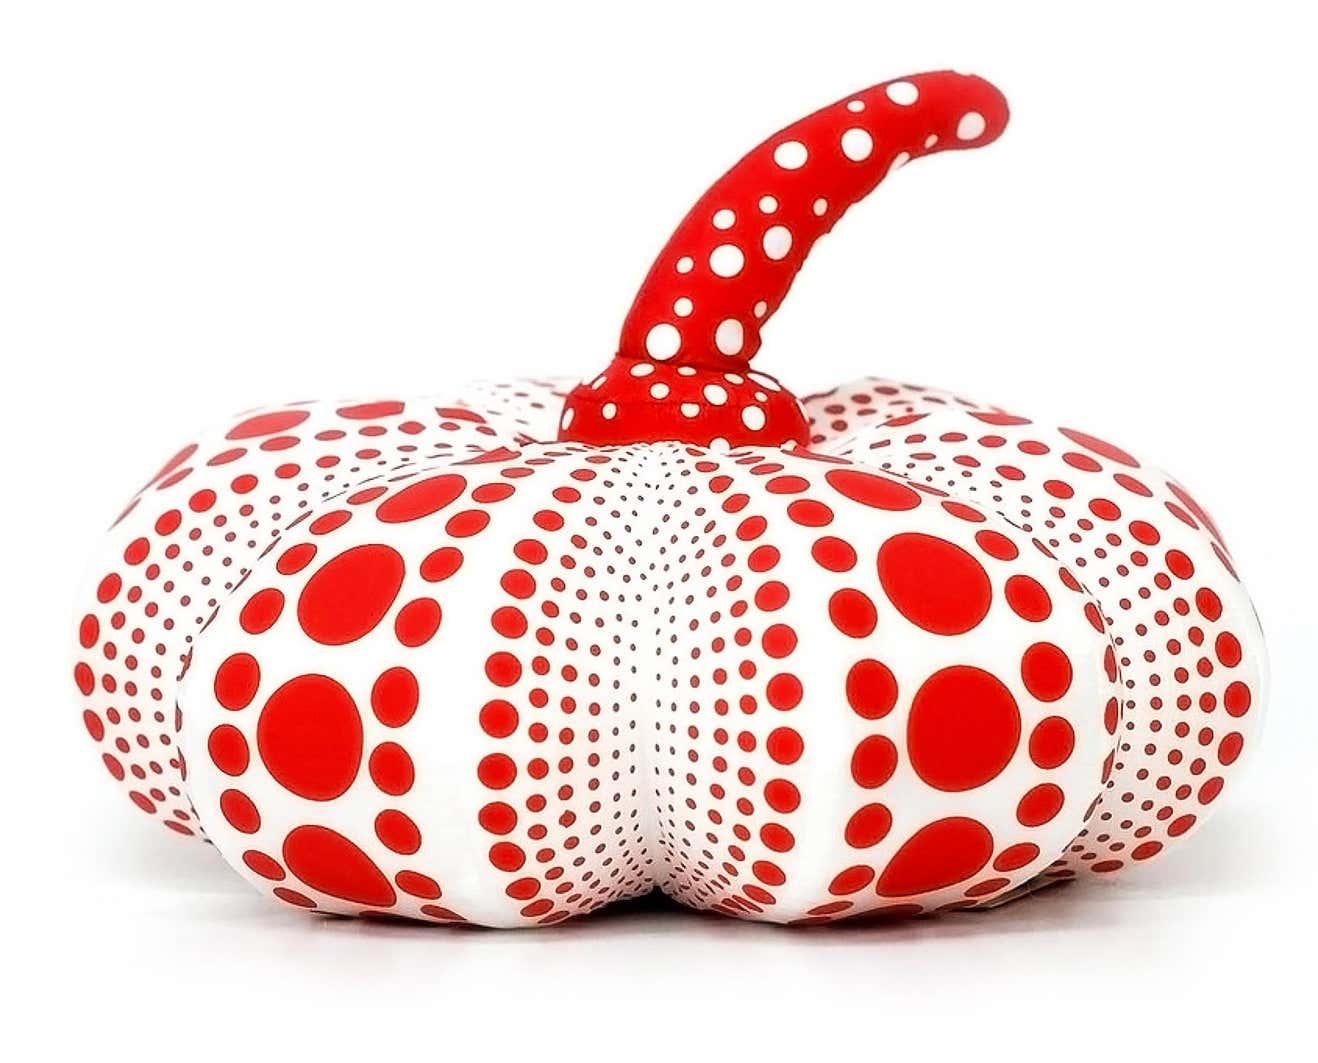 Yayoi Kusama Set of 3 Plush Pumpkins: Yellow and Black (large), Red & White and Yellow & Black (representing the 2 smaller):

An iconic, vibrantly colored pop art set - these Kusama plush pumpkins feature the universal polka dot patterns and bold